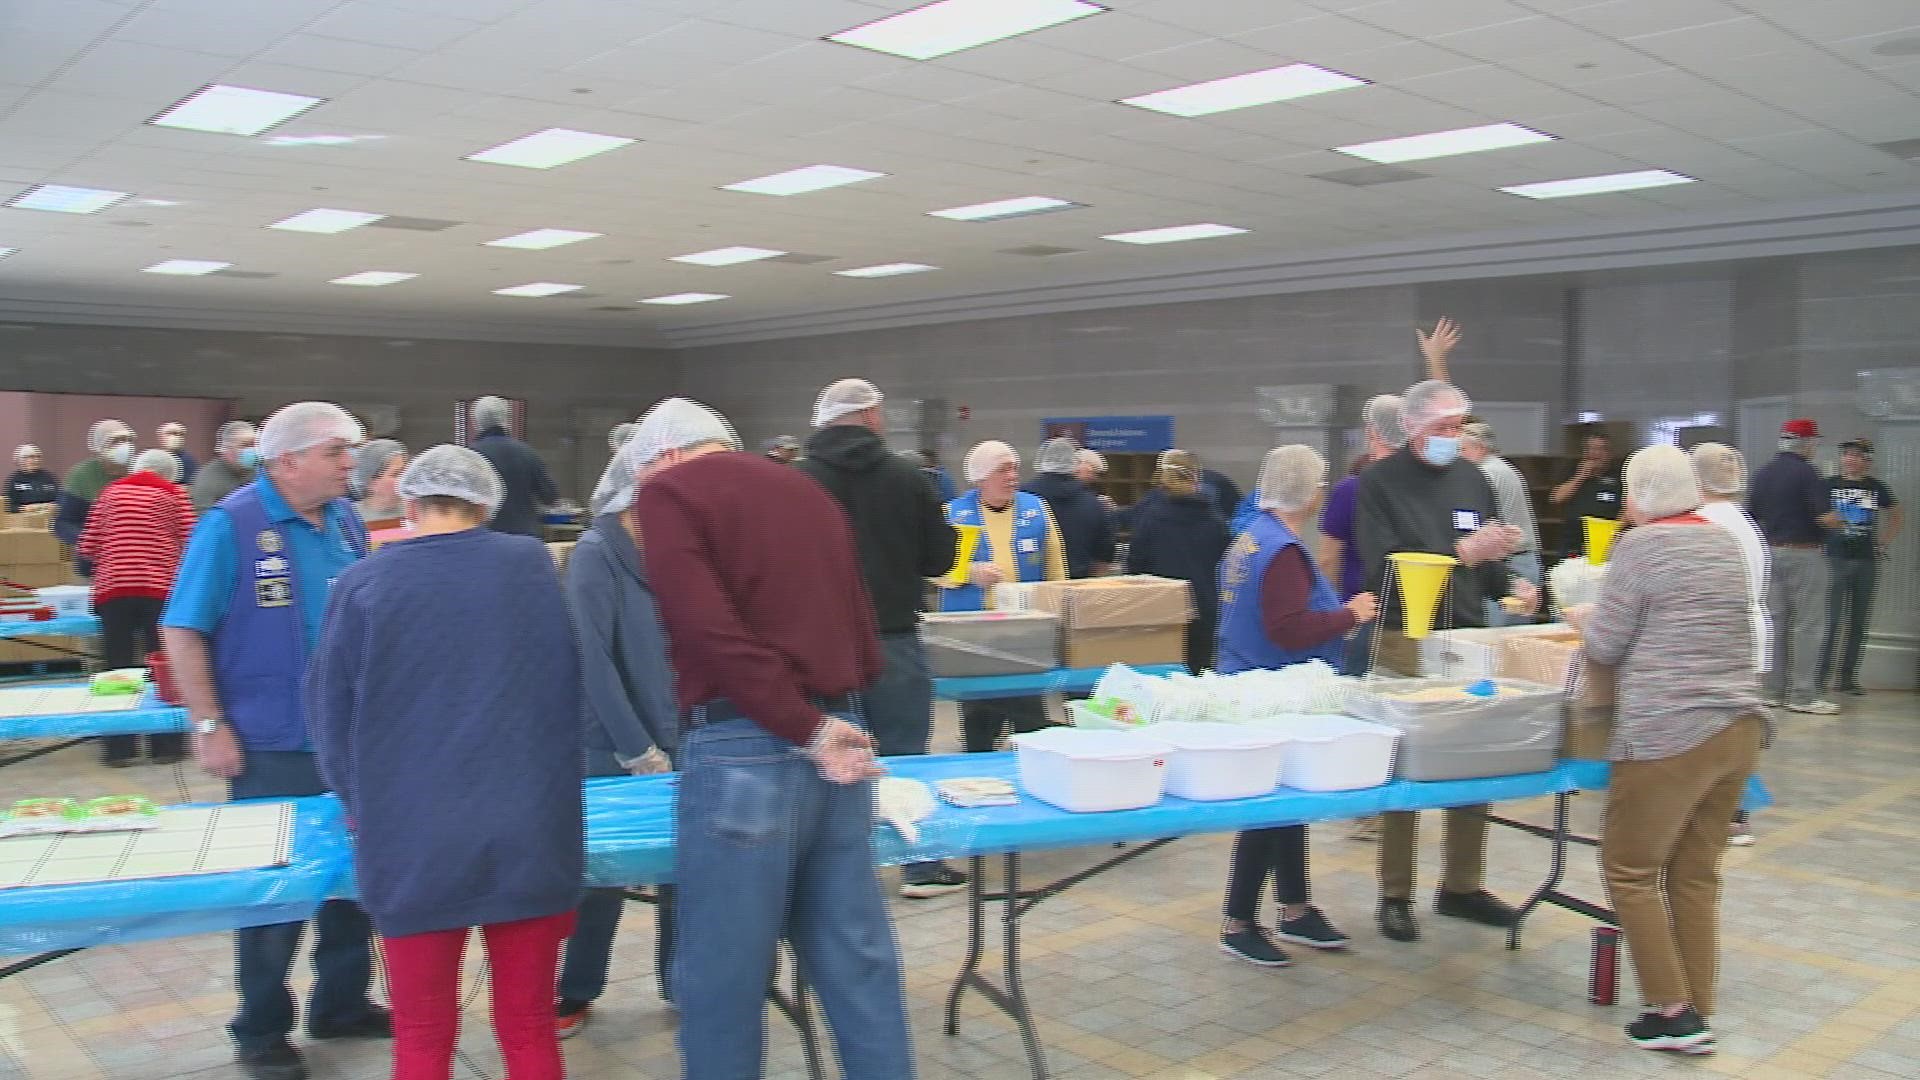 As food insecurity continues to take a toll on Connecticut's communities, chapters of local Kiwanis clubs gathered to pack thousands of meals for those in need.